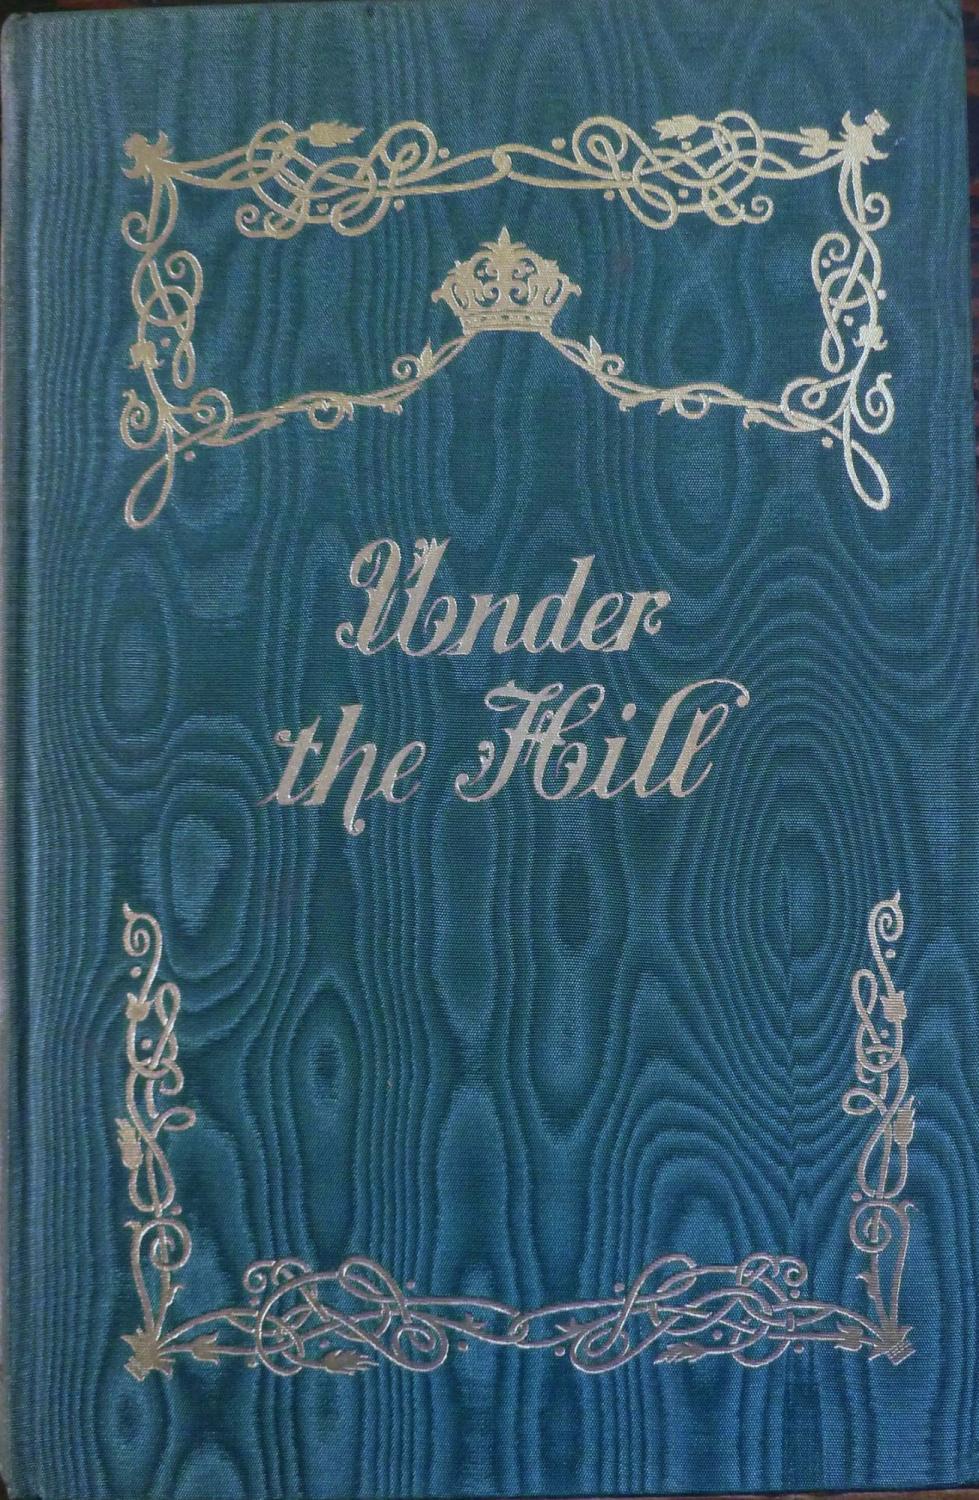 Under The Hill; Or The Story Of Venus And Tannhauser, In Which Is Set Forth An Exact Account Of The Manner Of State Held By Madam Venus, Goddess & Meretrix, Under The Famous Horselberg, And Containing The Adventures of Tannhauser, etc. - Beardsley, Aubrey